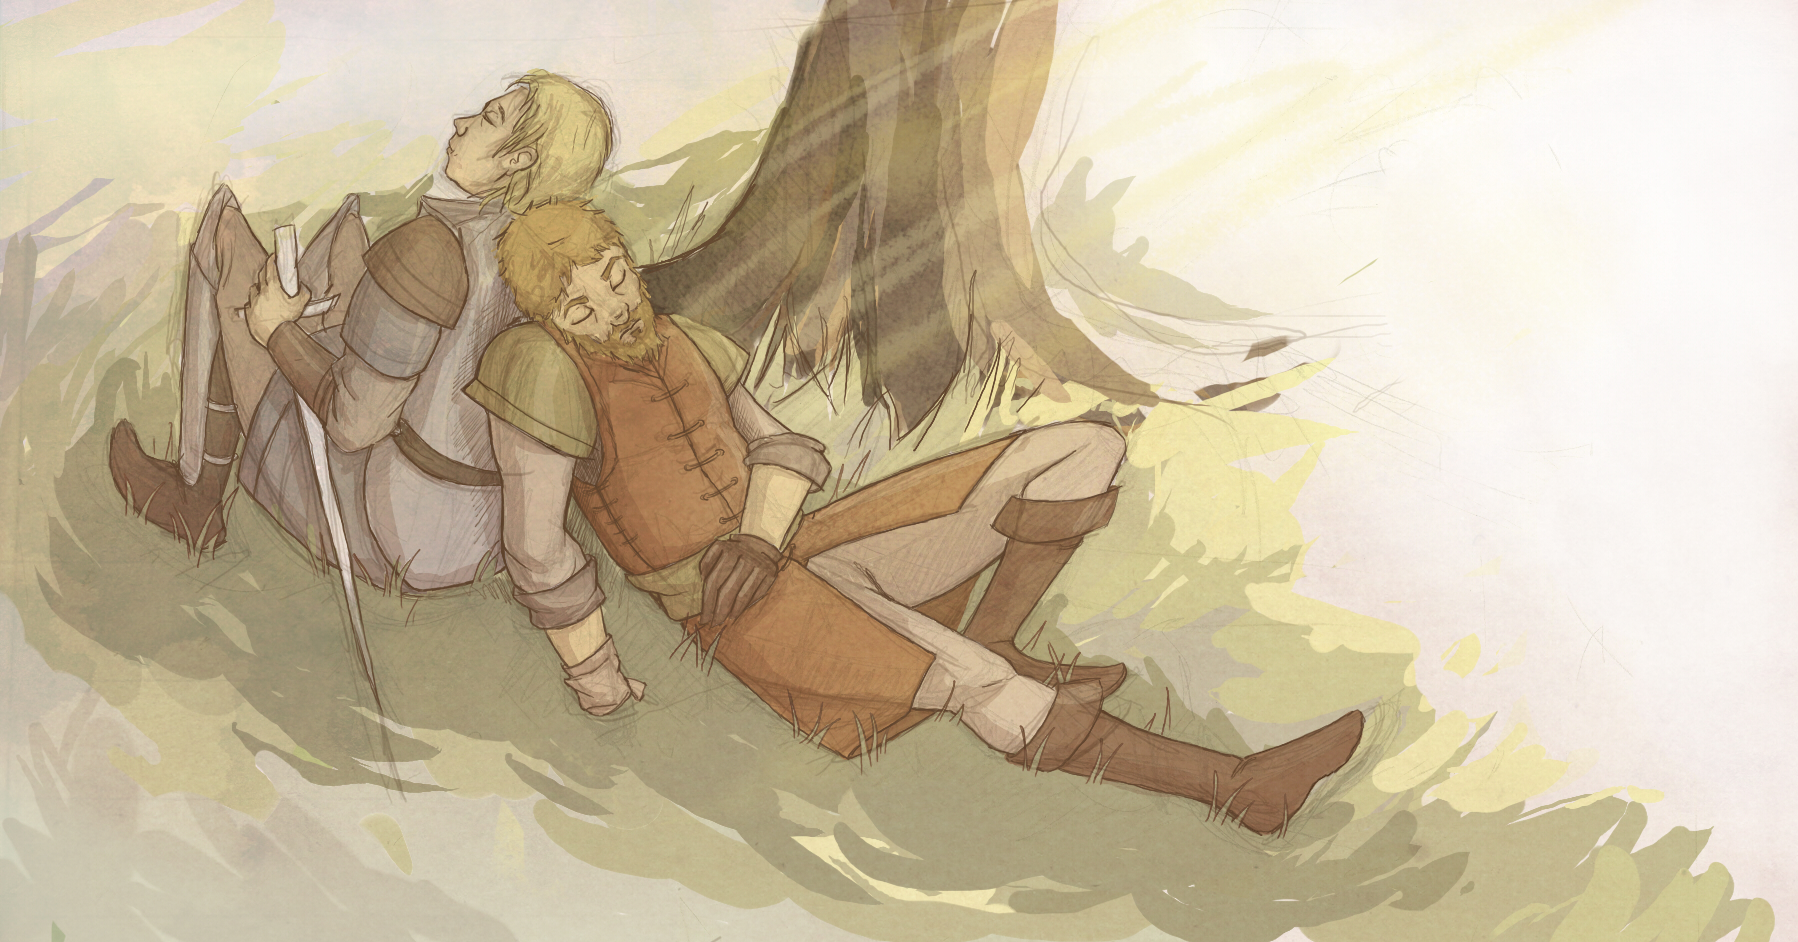 A Song of Ice and Fire - Brienne and Jaime by Mustamirri